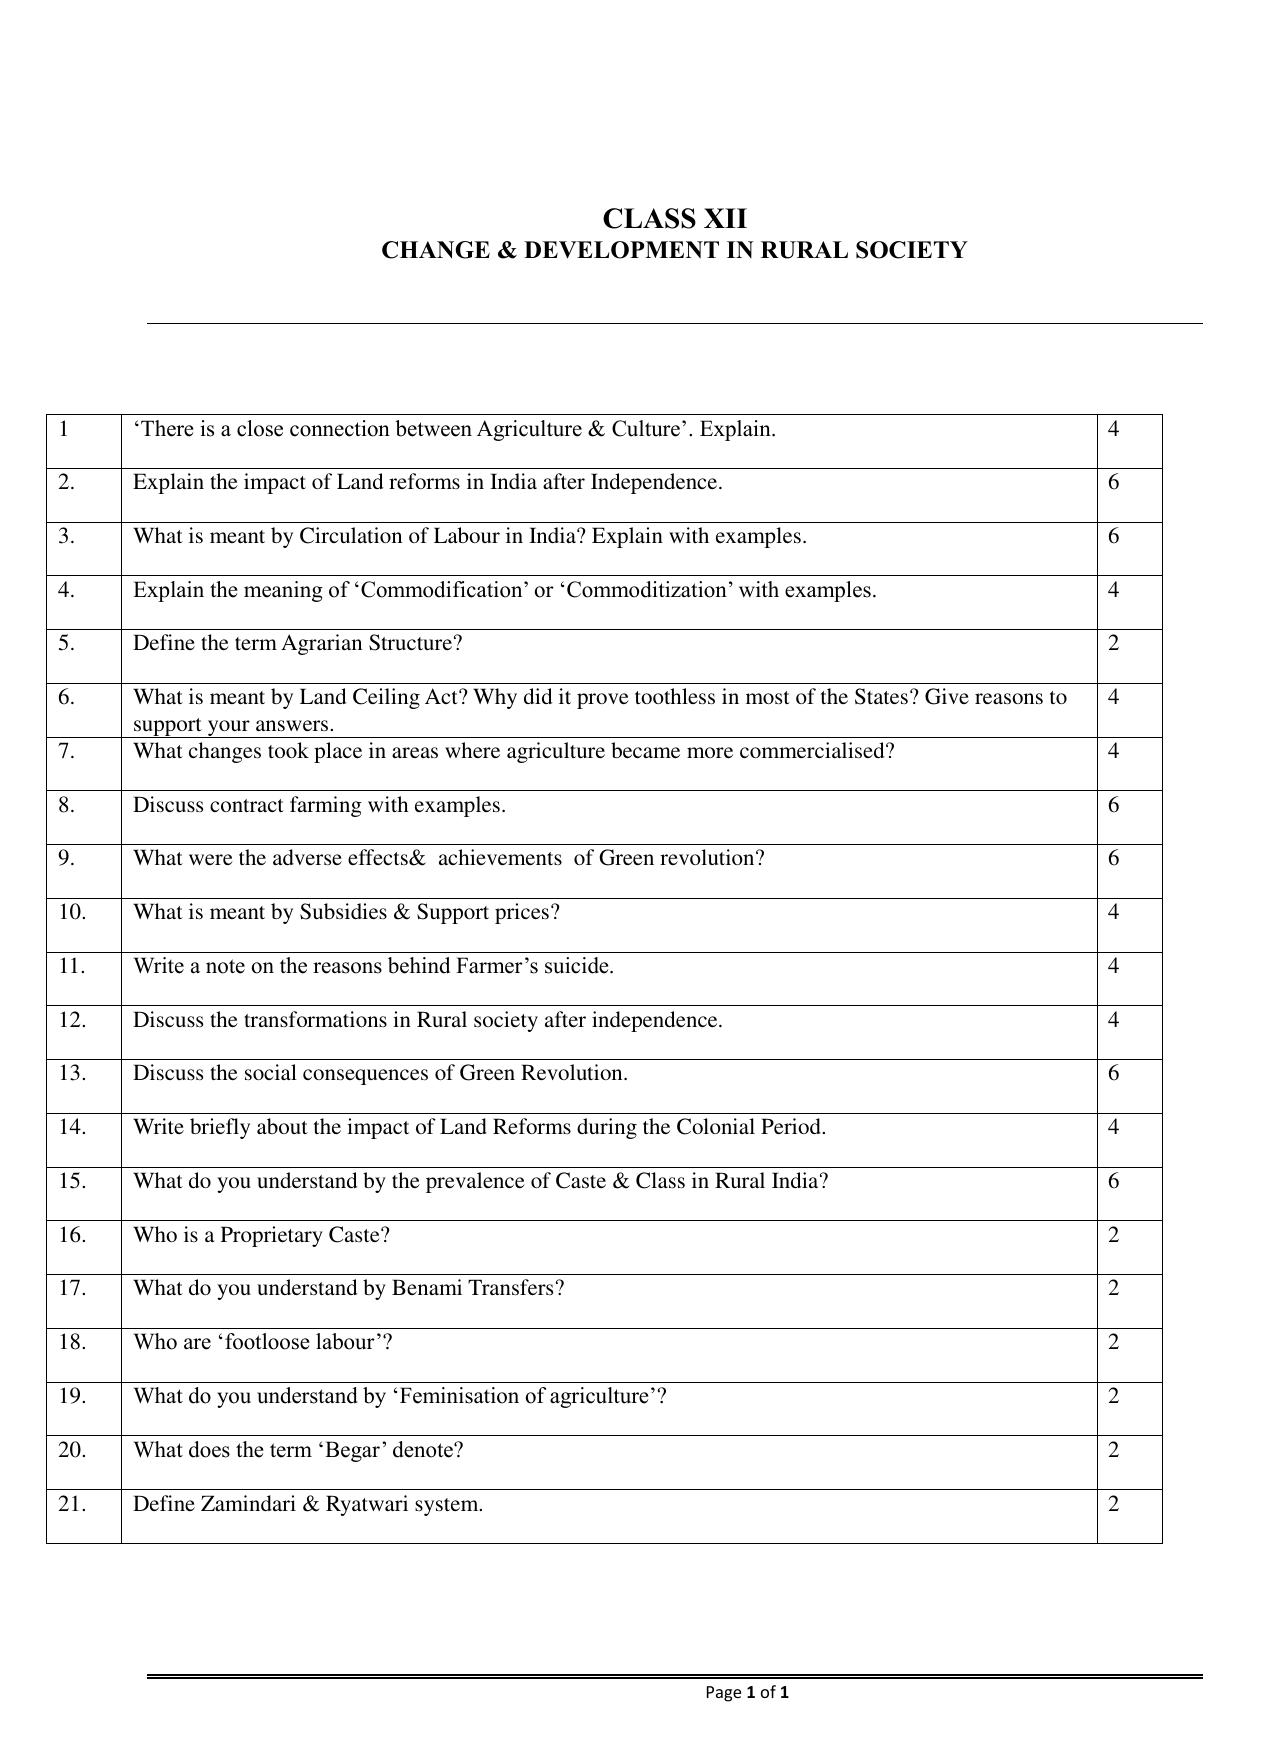 CBSE Class 12 Sociology Change and Development in Rural Society Worksheets - Page 1